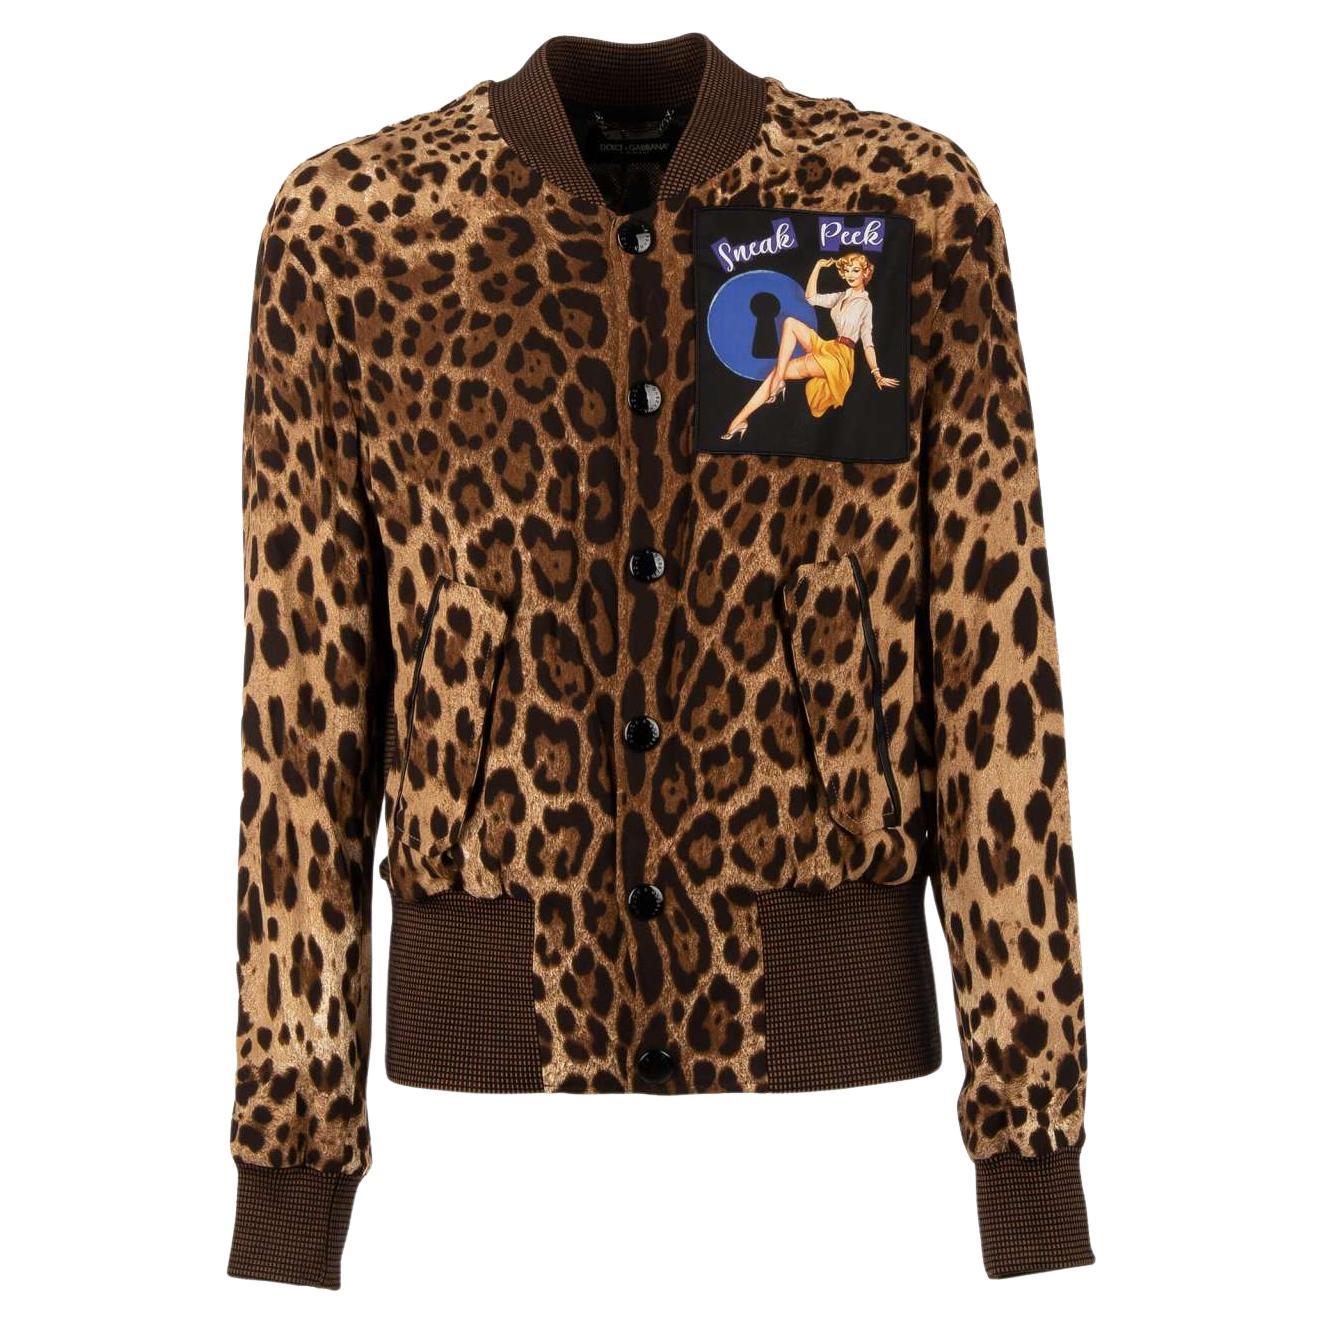 Dolce & Gabbana Leopard Printed Bomber Jacket with SNEAK PEEK Patch Brown 48 For Sale